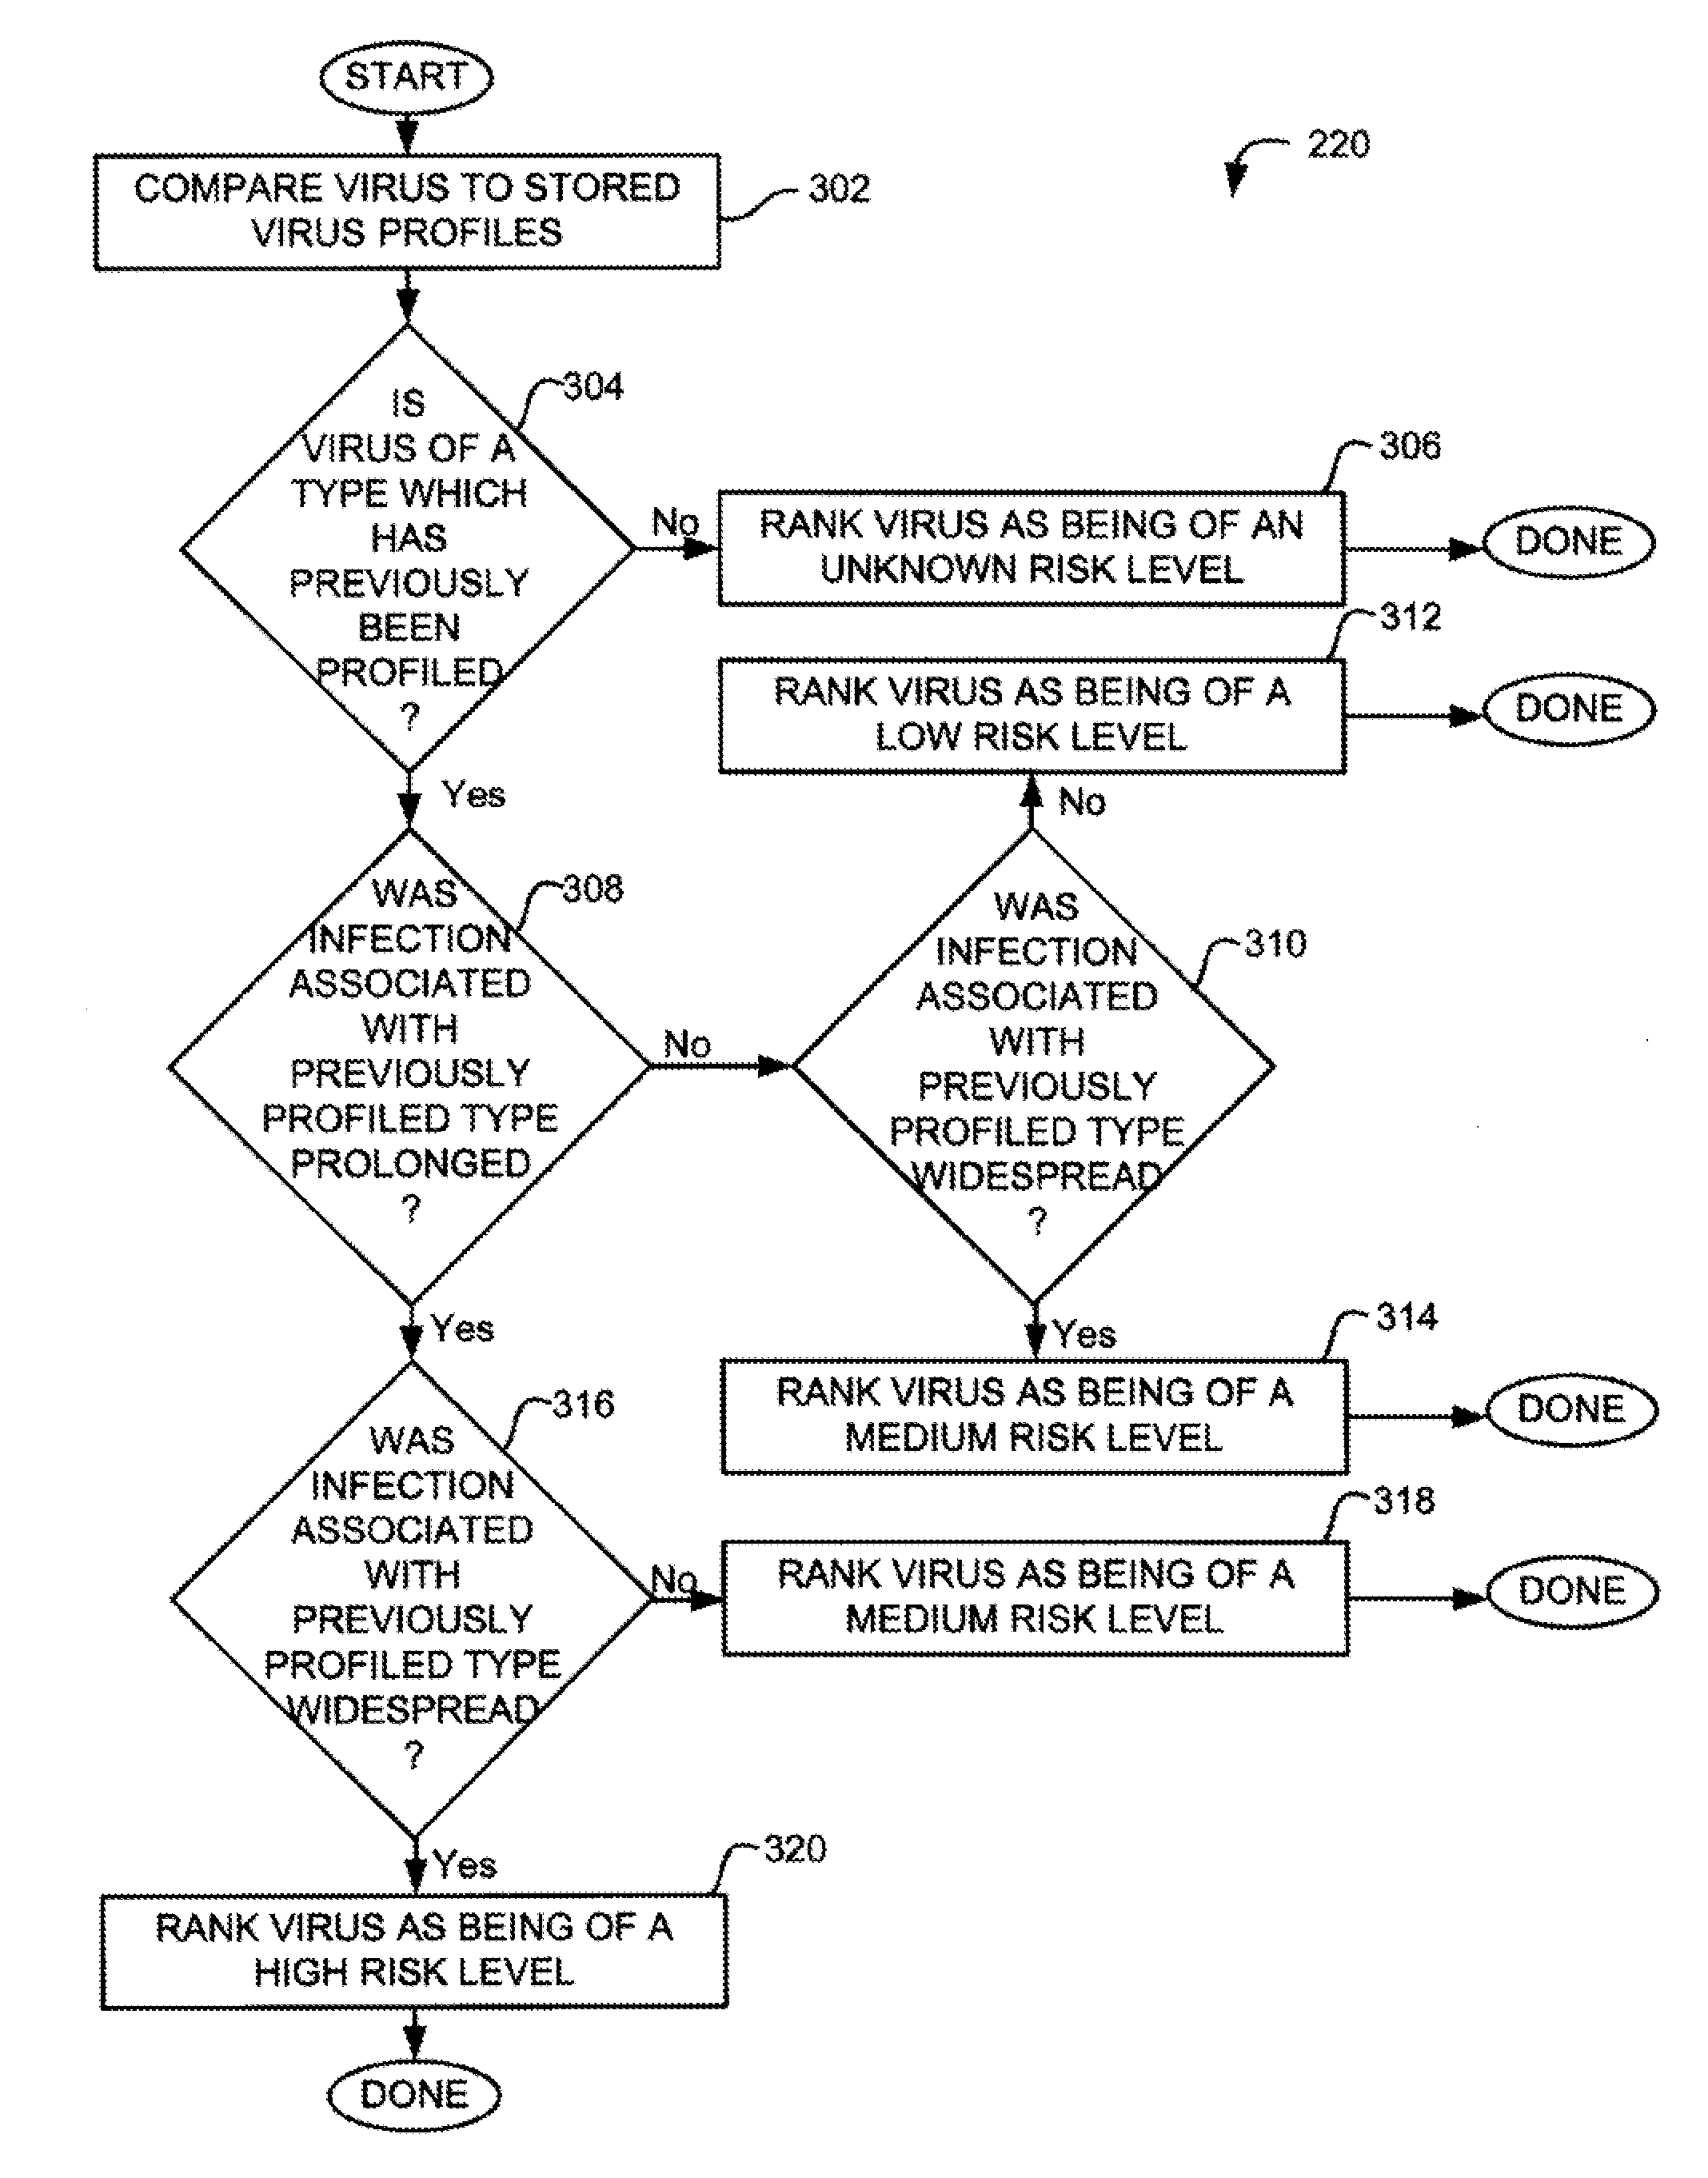 Virus prediction system and method